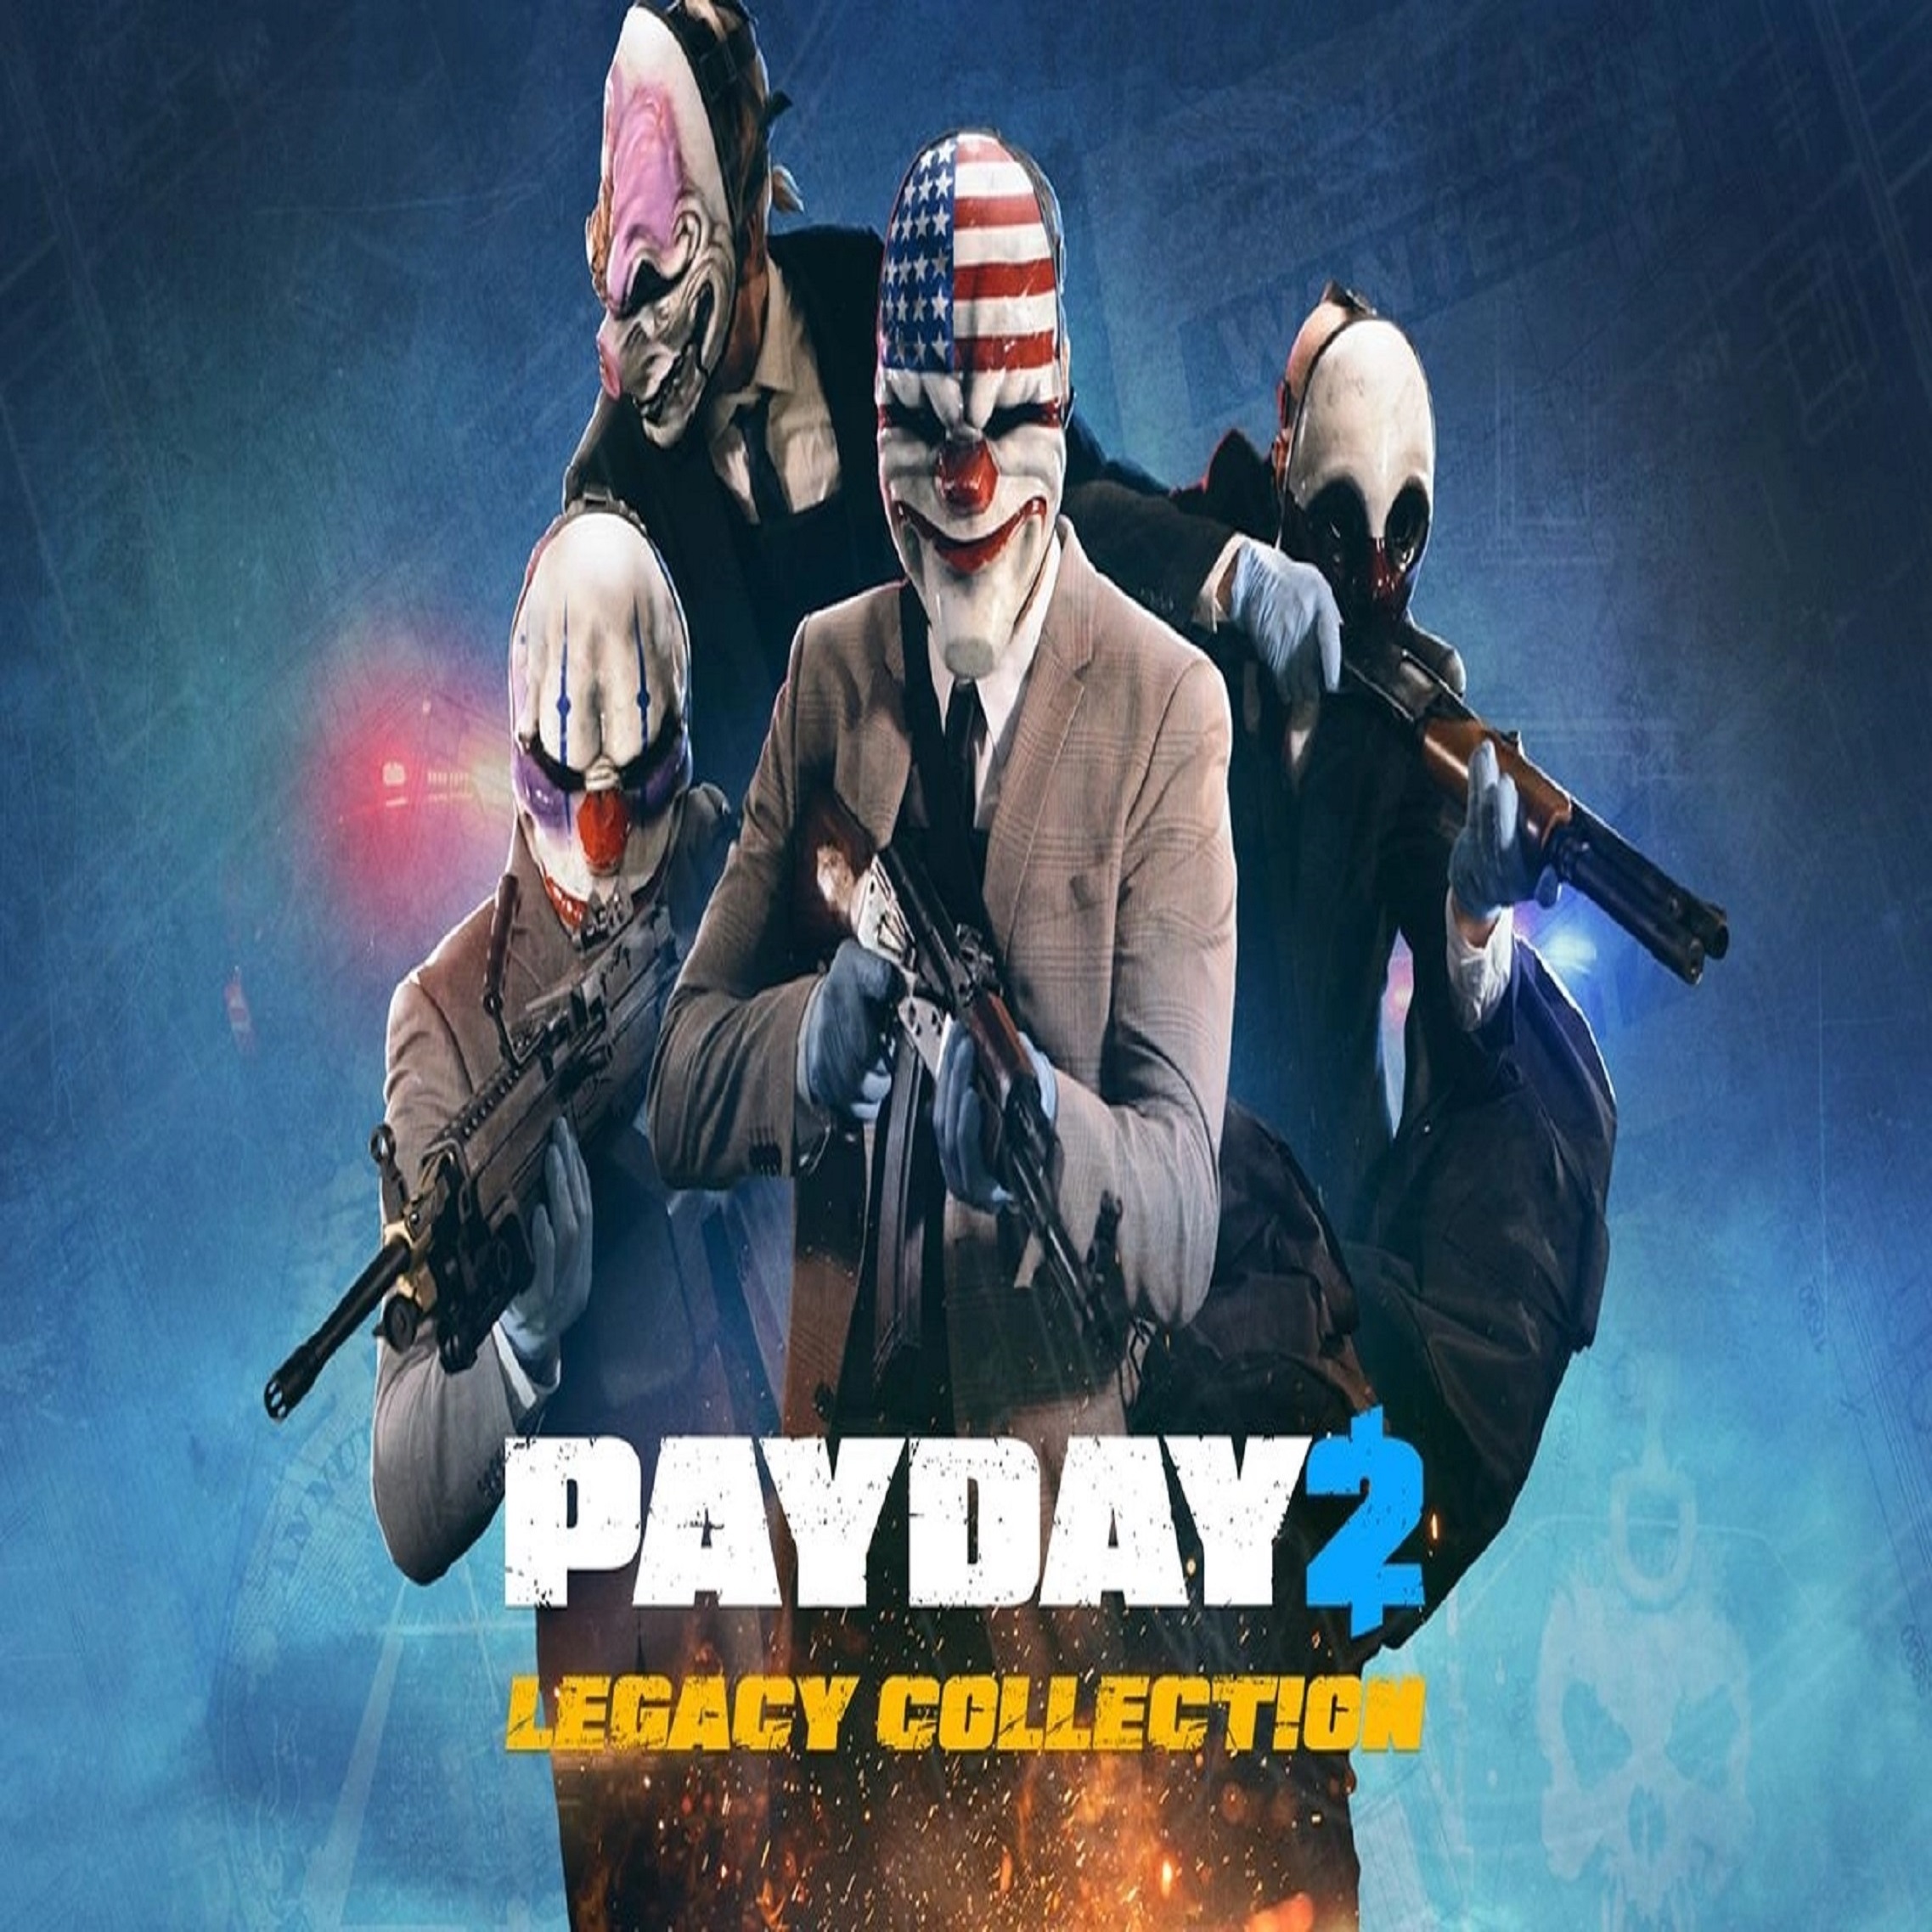 Steam must be running to play this game payday 2 фото 15